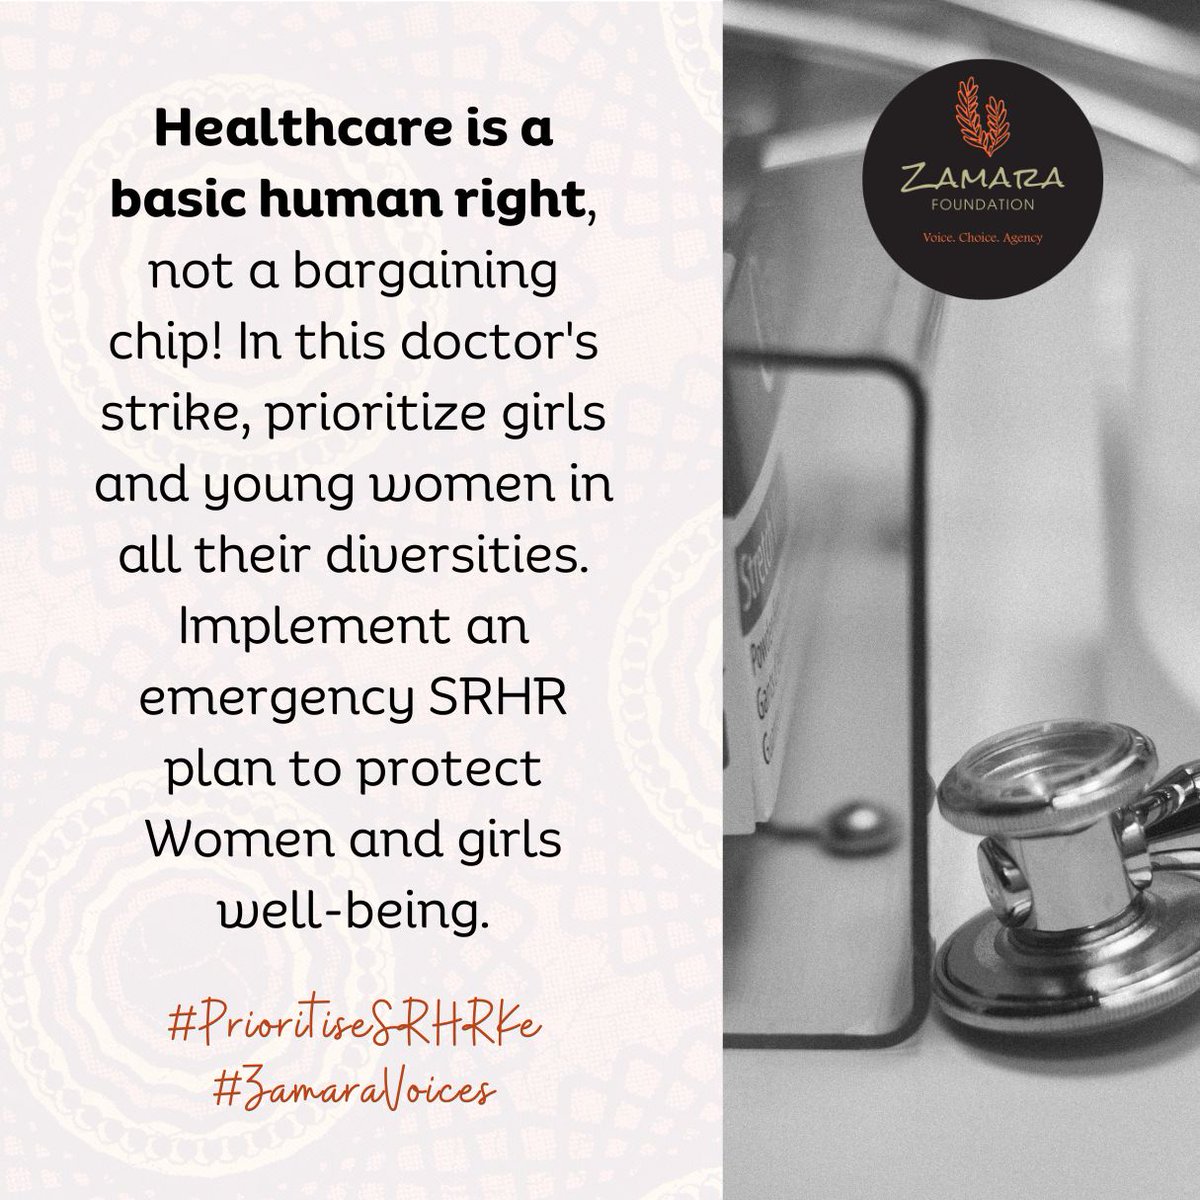 Unmet SRHR needs pose a unique and monumental burden on society at large. Access to SRH services is vital to achieving SDGs goals. #PrioritiseSRHRKe #ZamaraVoices @Zamara_fdn